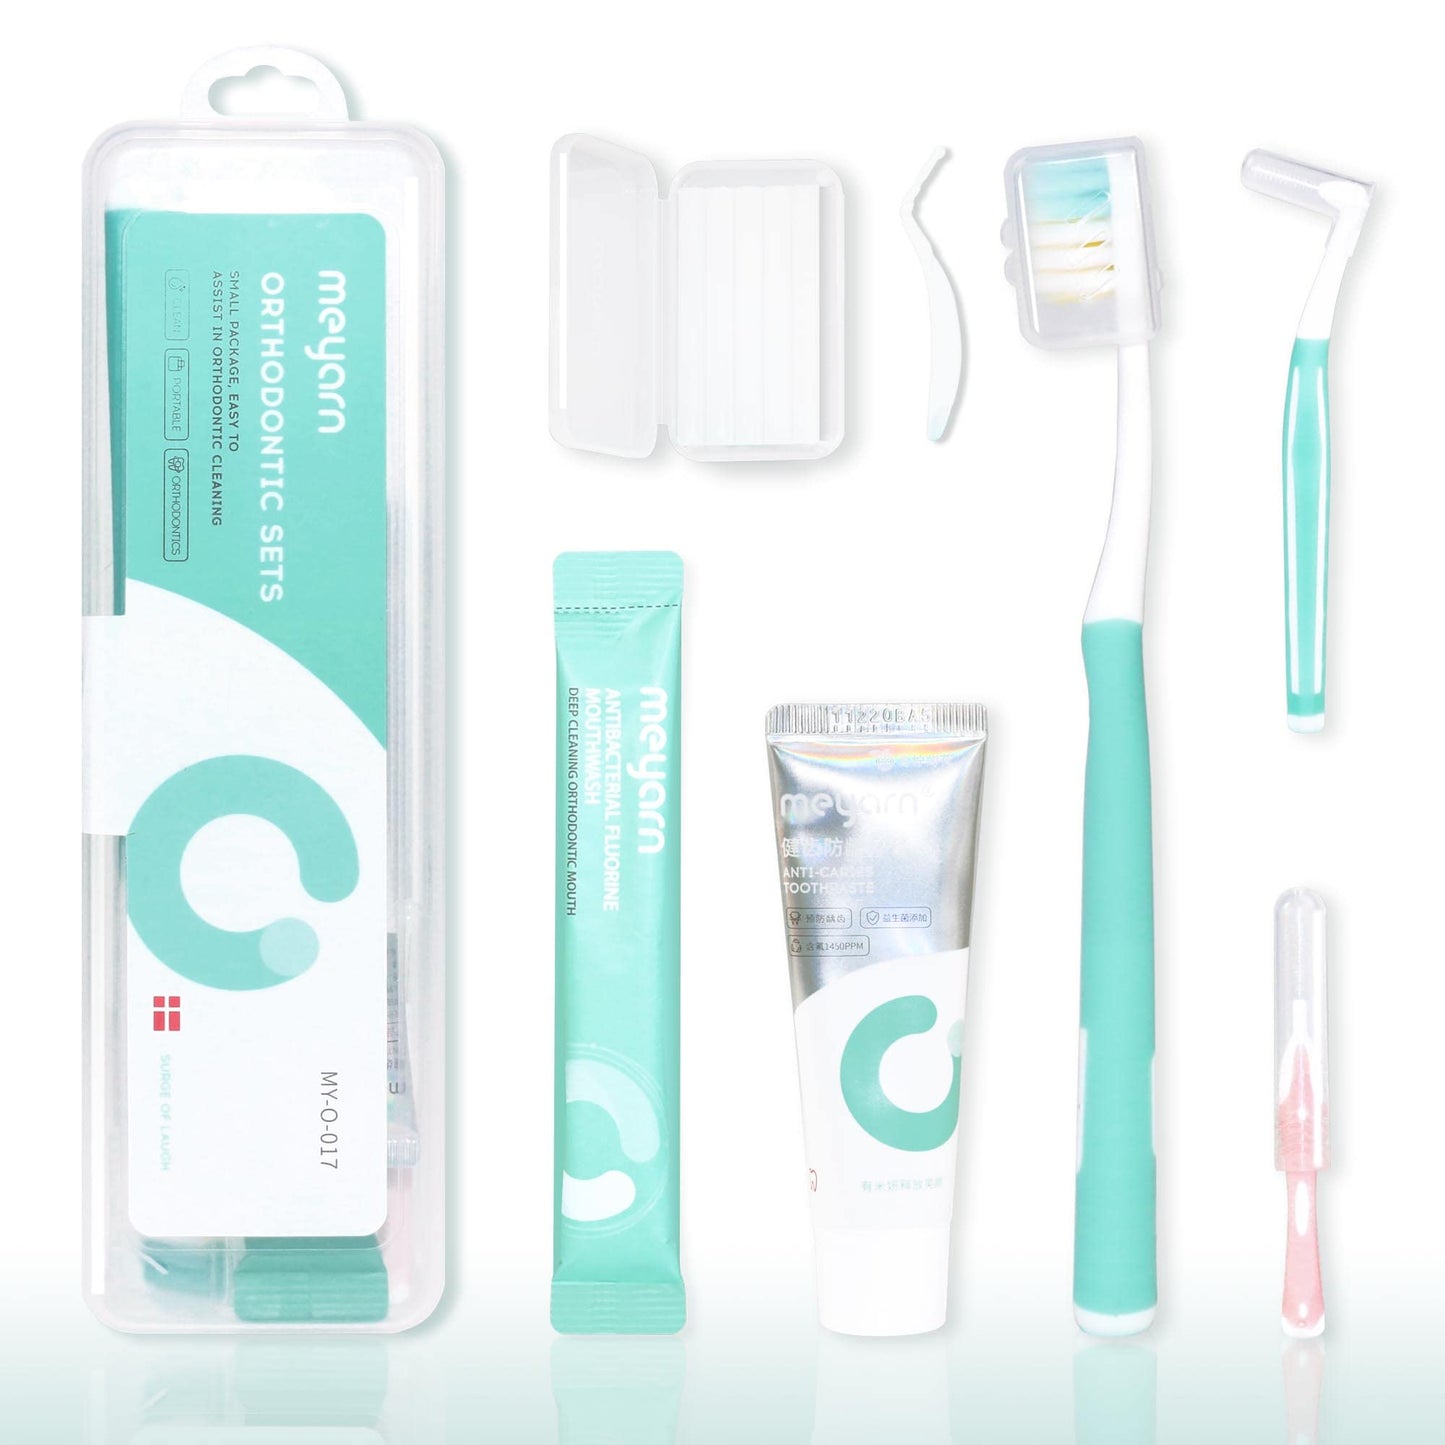 Orthodontic Dental Oral Care Kit 6-Pc Set with Box, [Toothbrush] [Toothpaste] [Interdental Brush] [Dental Wax] [Mouthwash] Suitable for Braces Starter Cleaning Kit Portable Dental Health